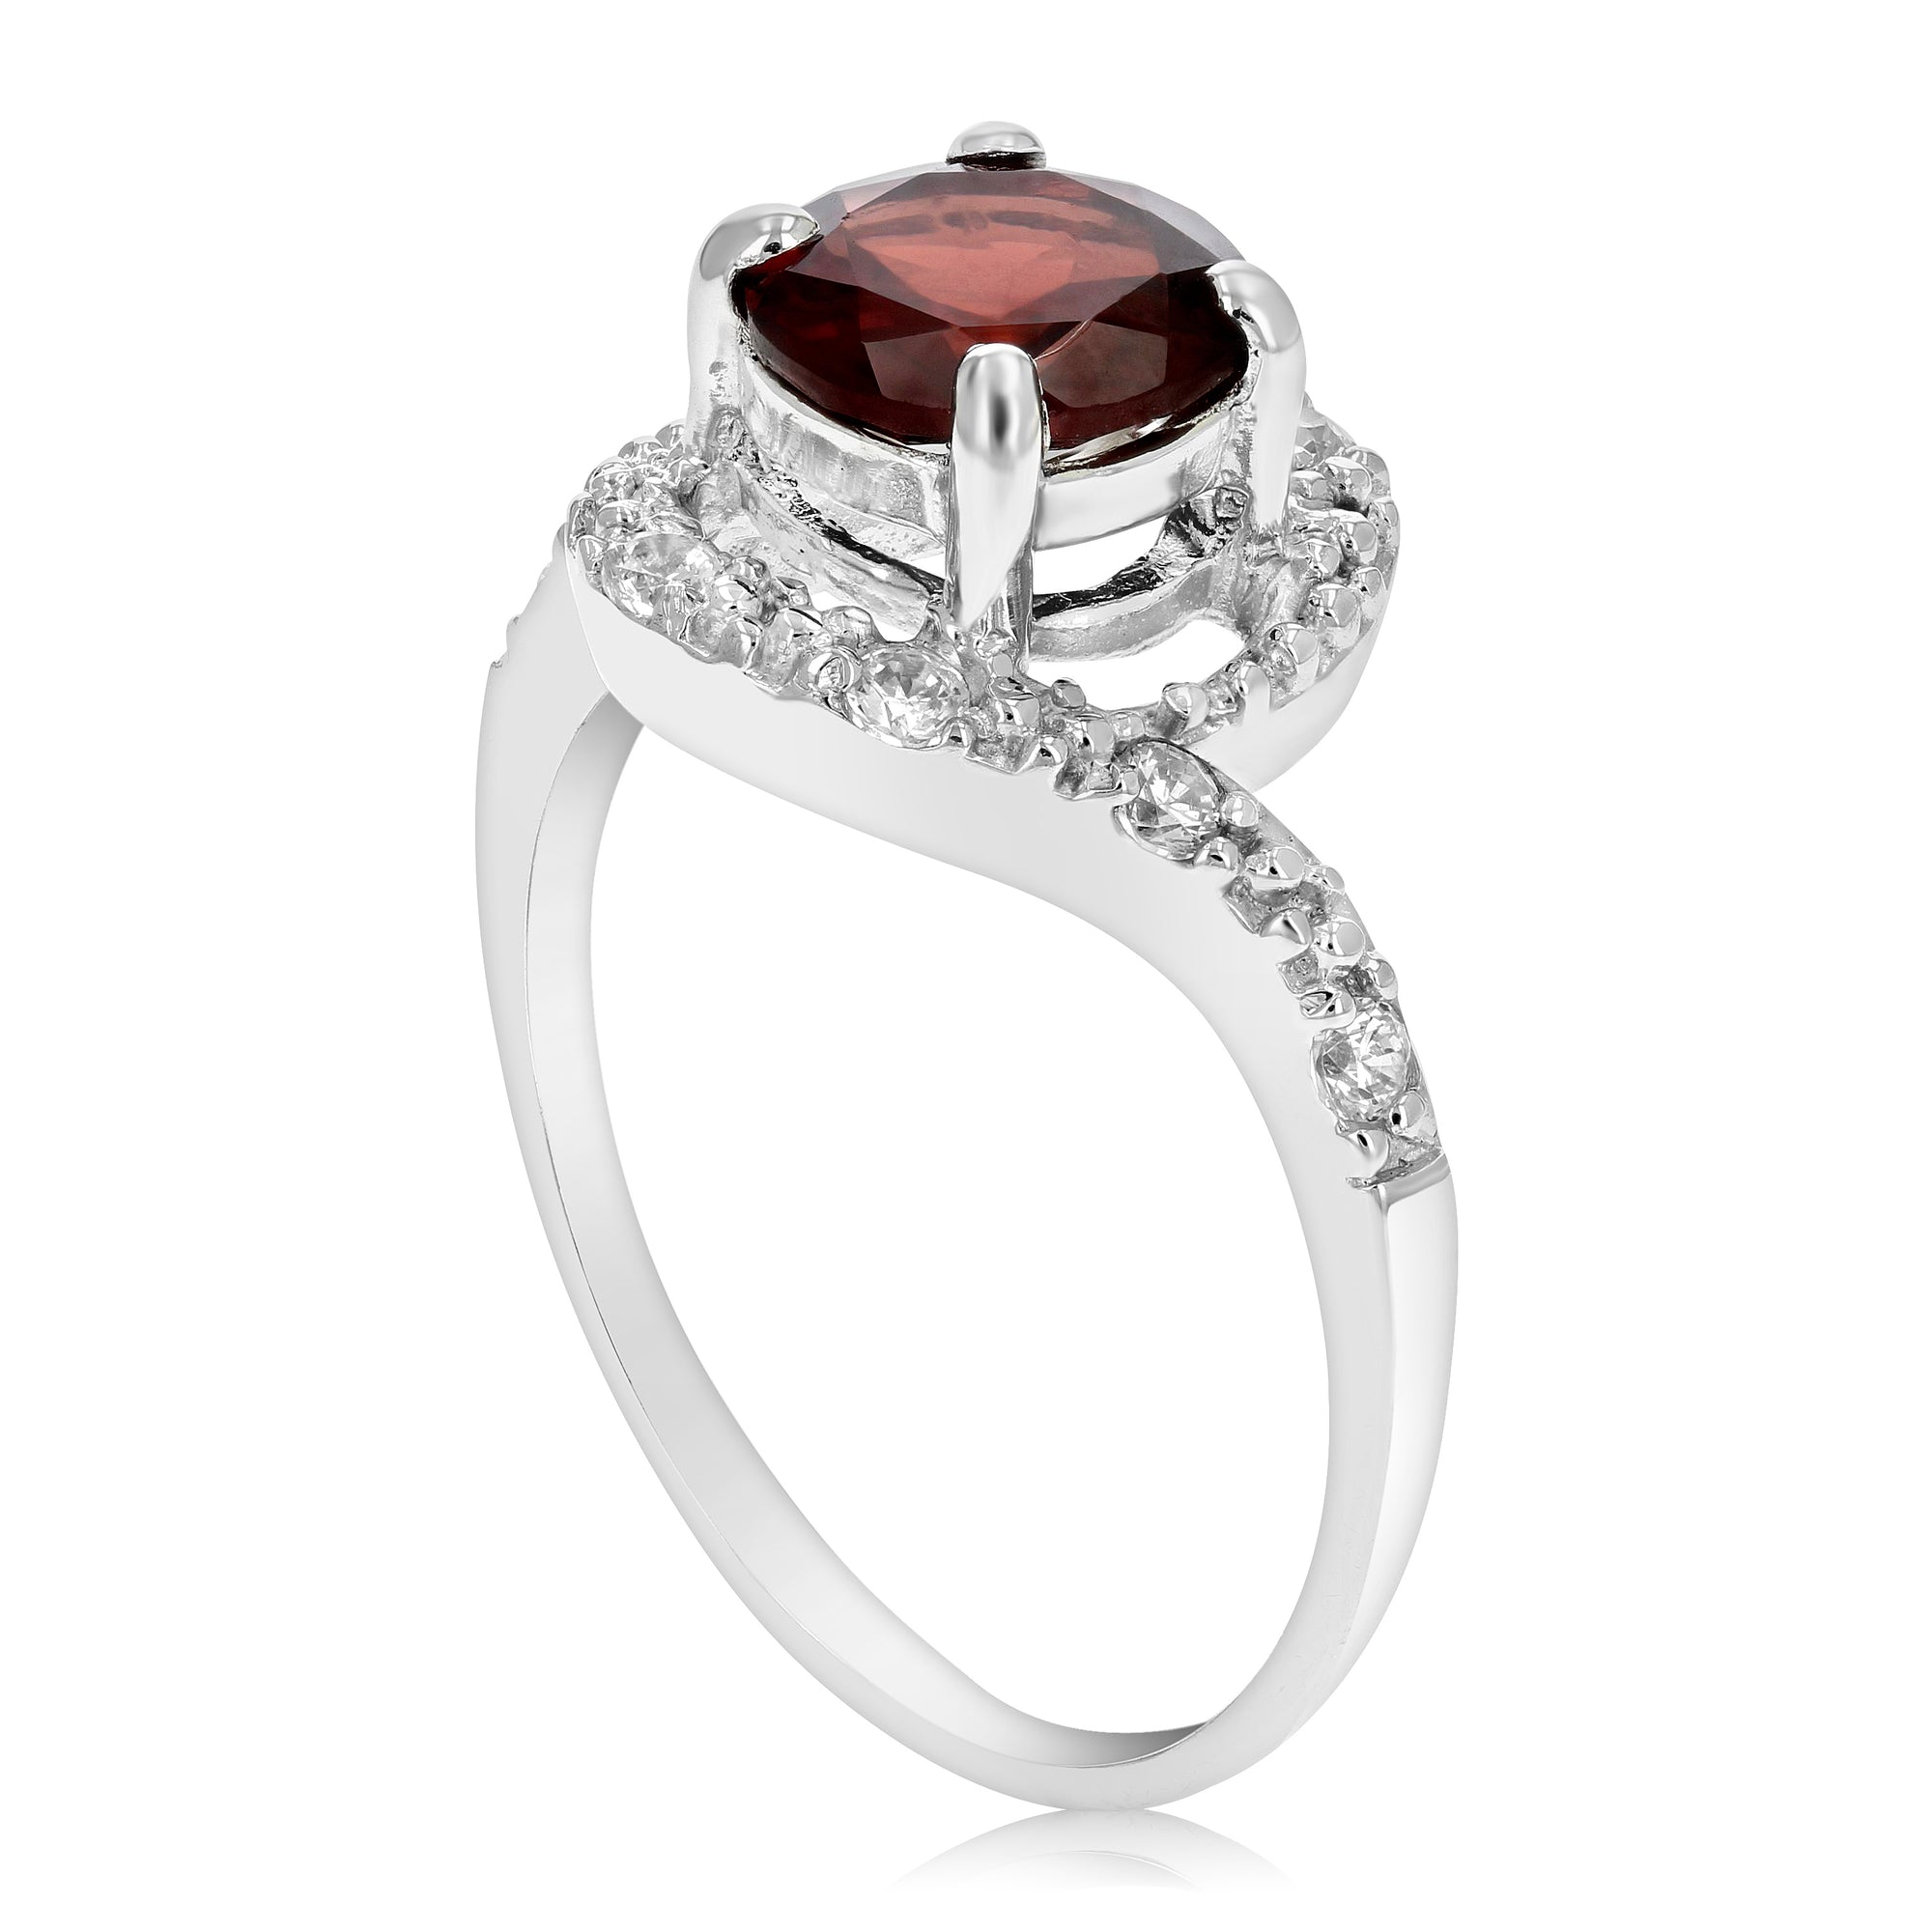 1.05 cttw Round Halo Style Garnet Ring .925 Sterling Silver with Rhodium 7 MM